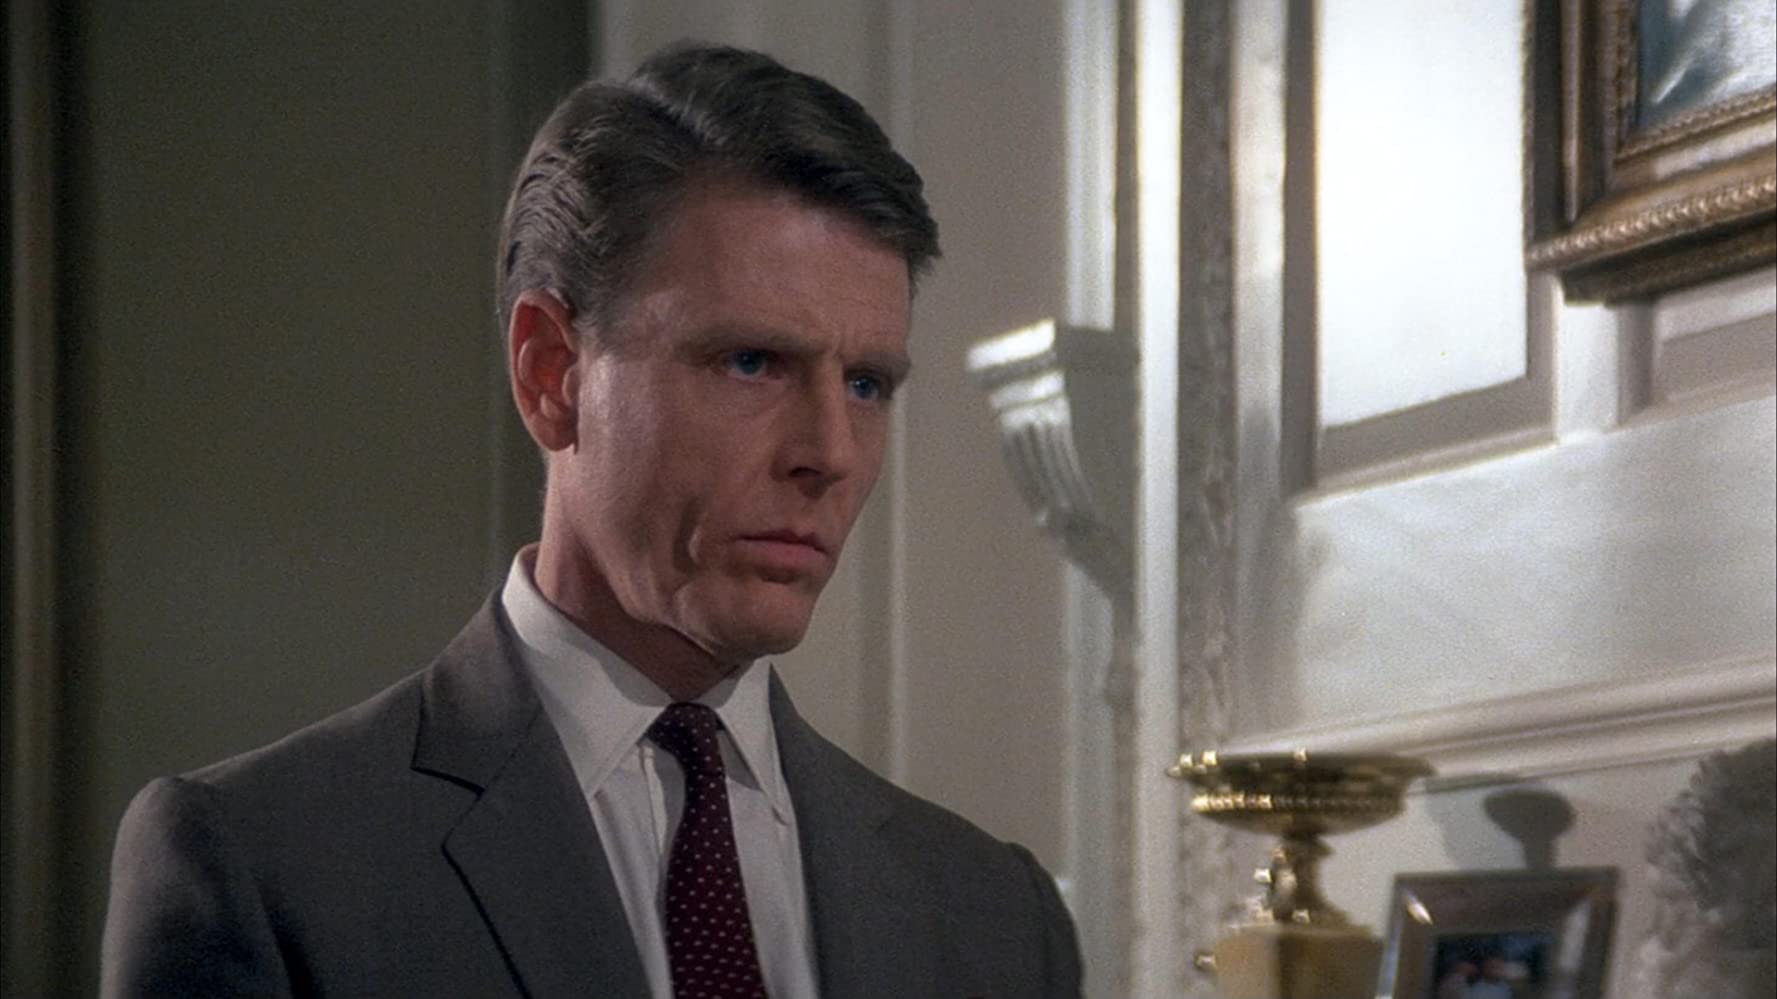 Happy 83rd birthday Edward Fox! I sincerely hope you are not too bothered by free radicals today! 